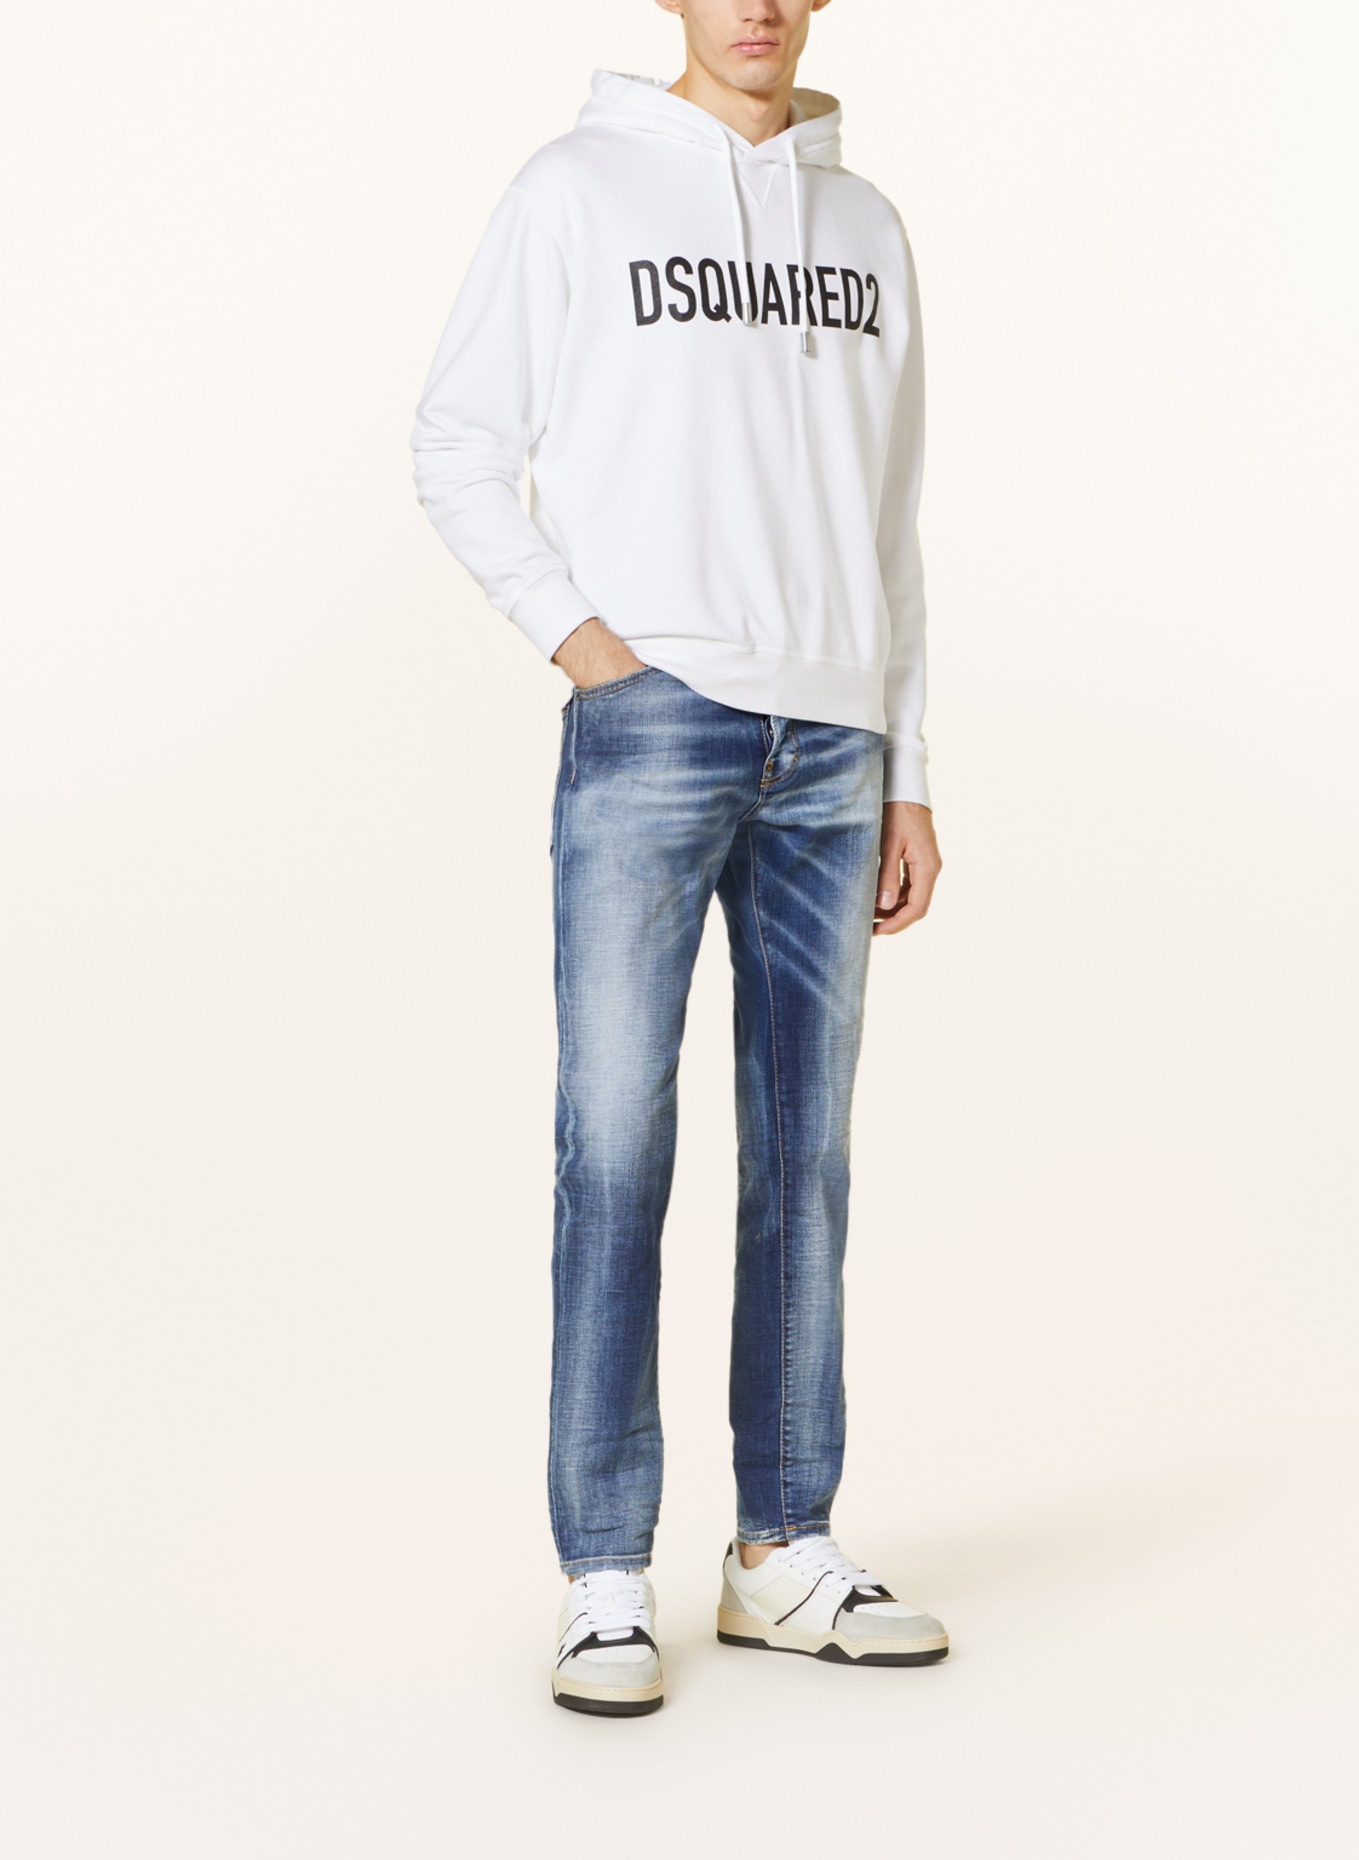 DSQUARED2 Jeans COOL GUY Extra Slim Fit, Farbe: 470 NAVY BLUE (Bild 2)